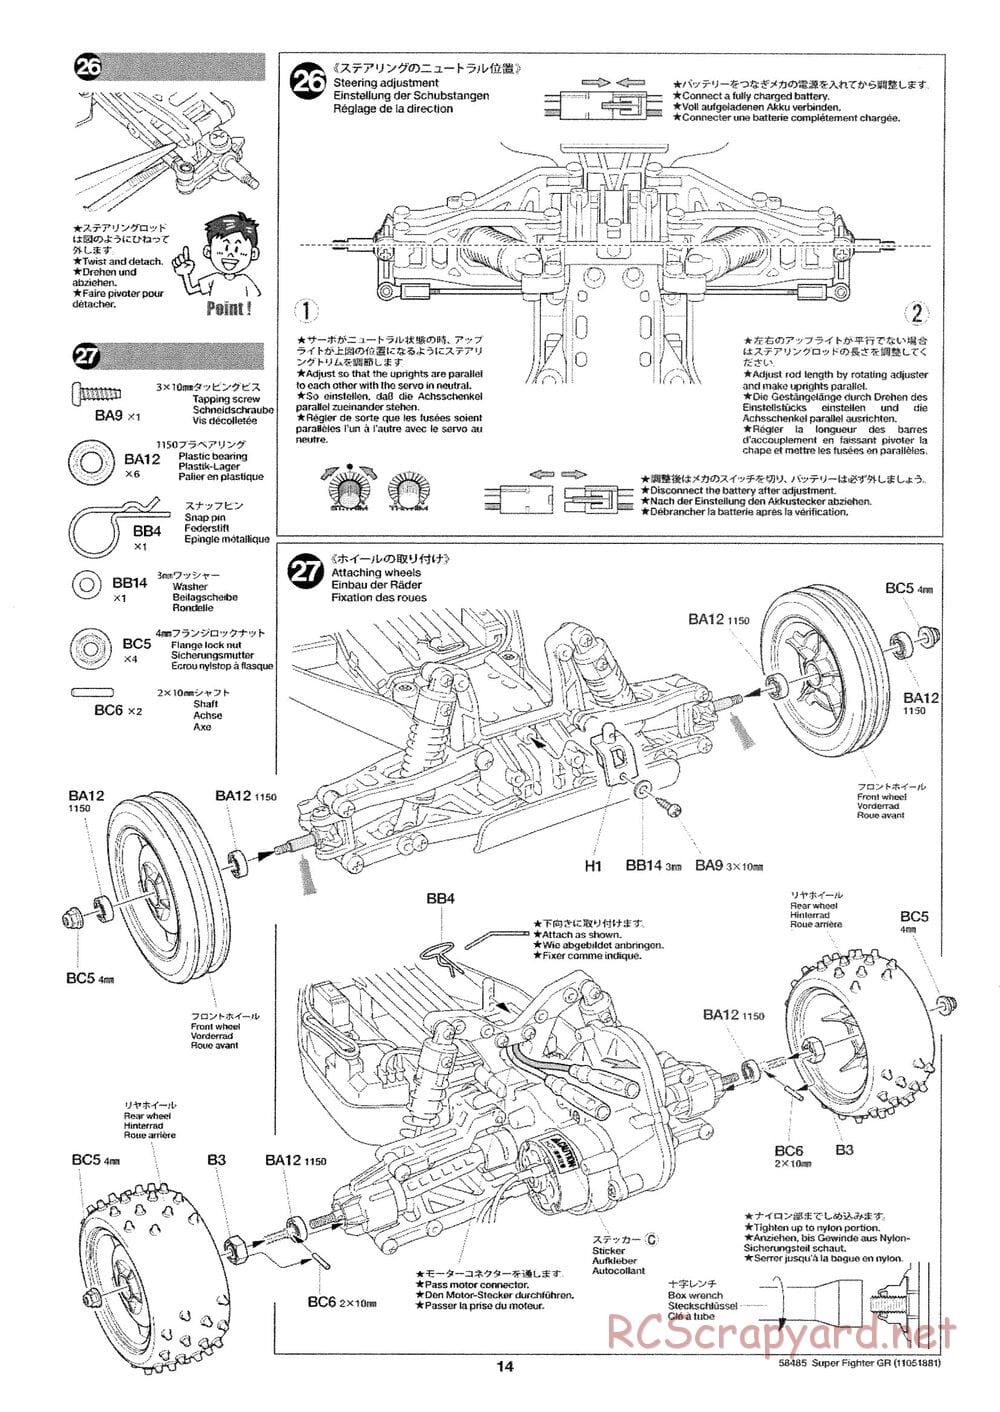 Tamiya - Super Fighter GR - DT-02 Chassis - Manual - Page 14